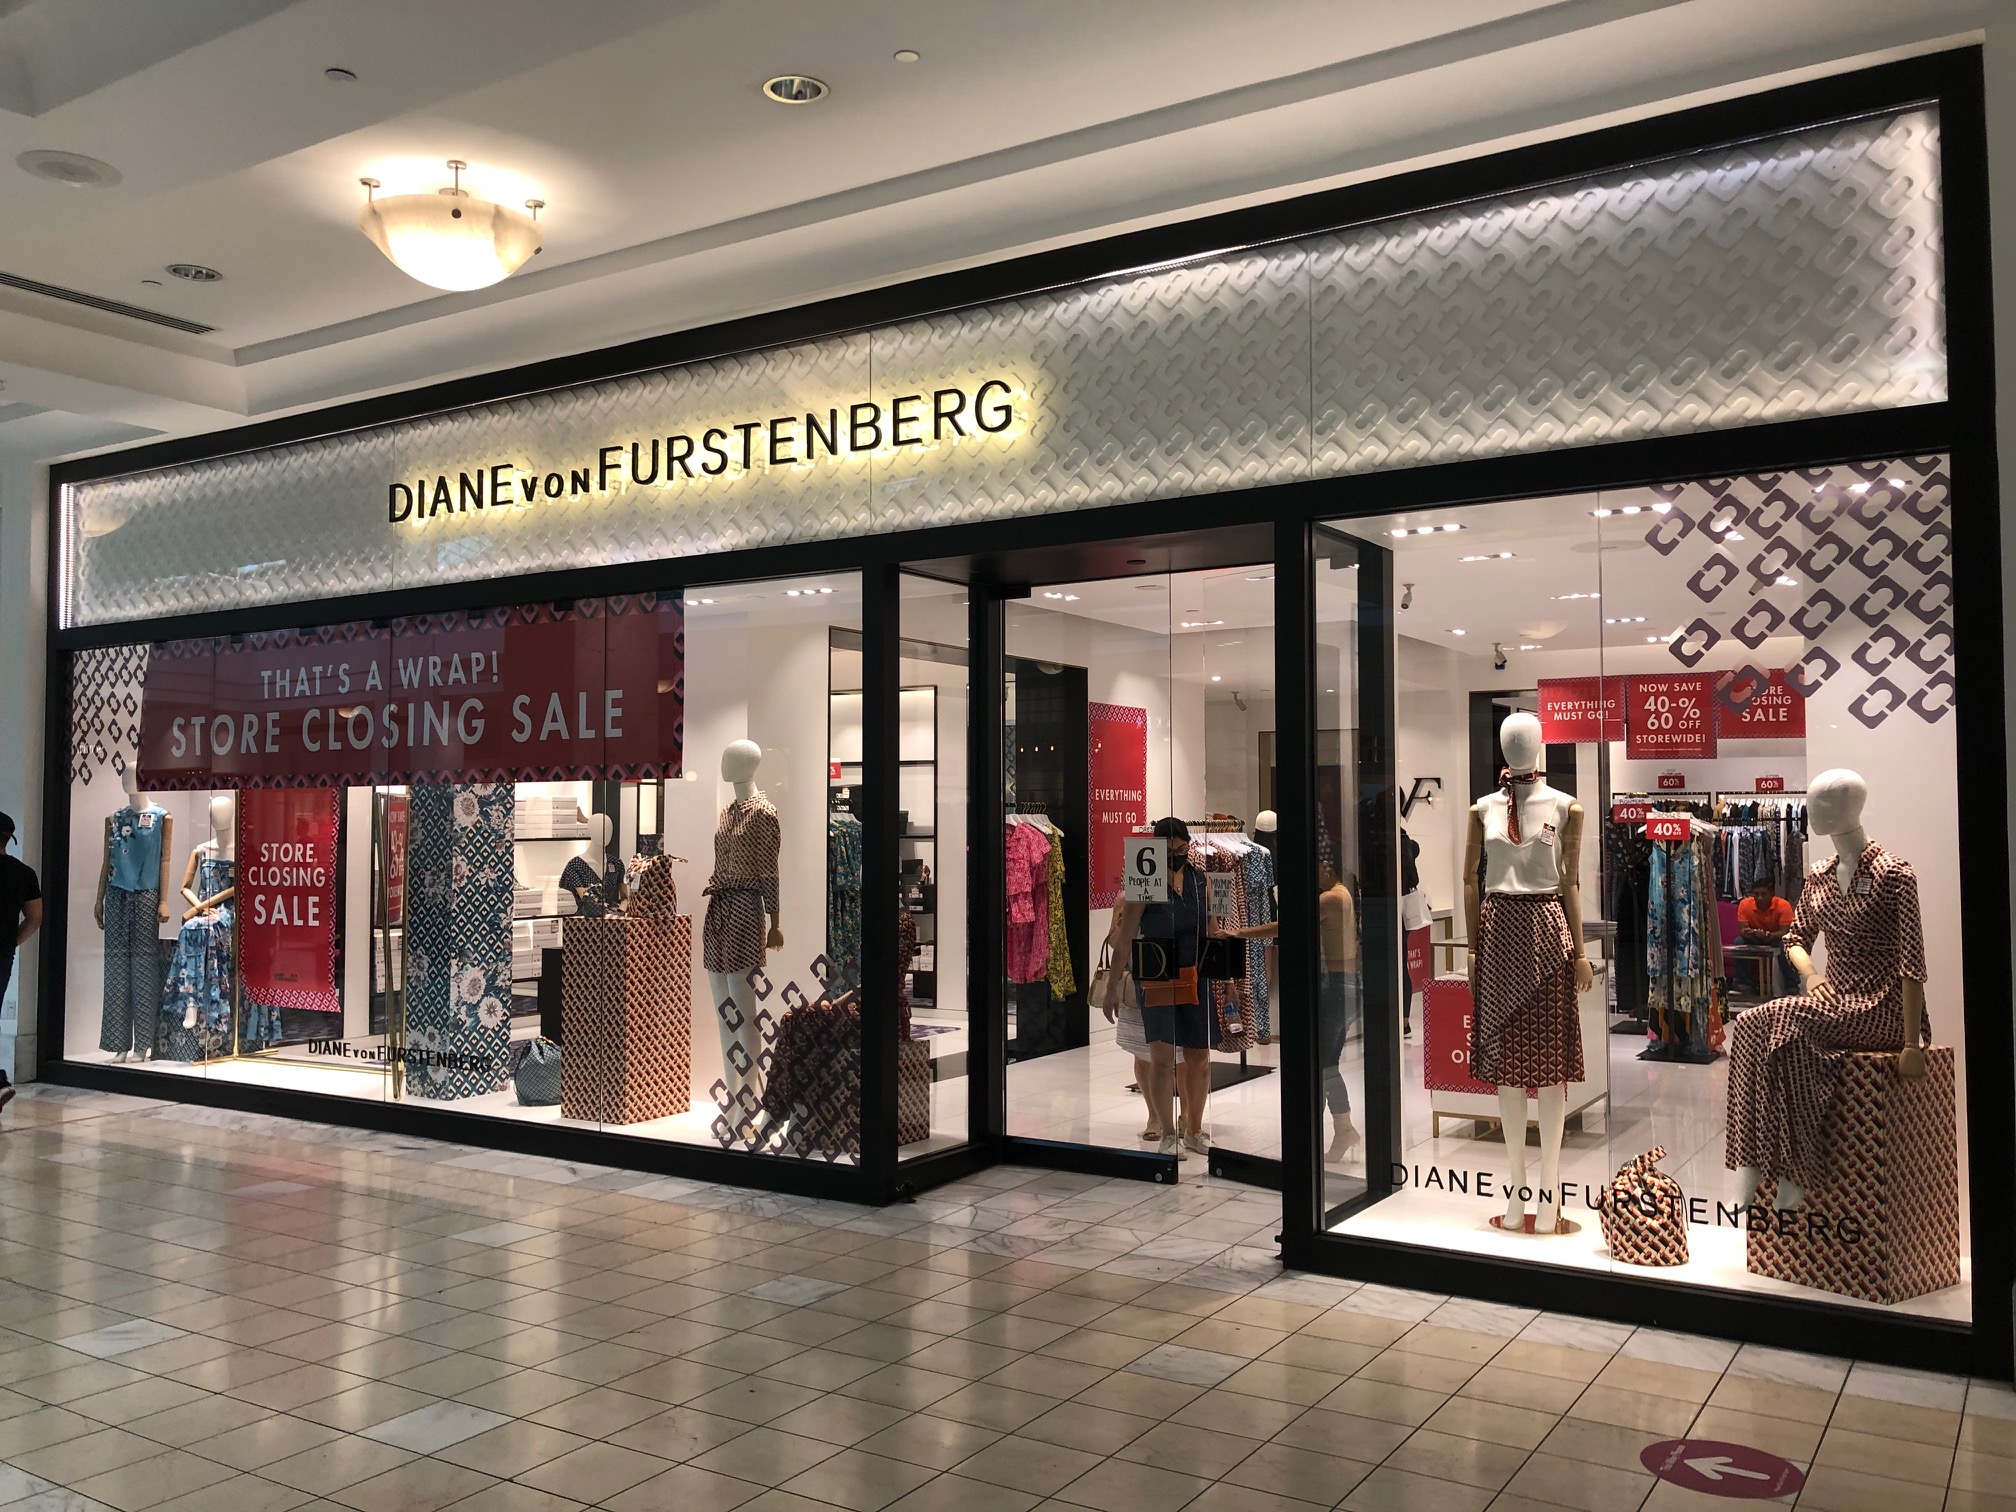 Diane von Furstenberg Is Closing Its Stores — and Dresses Are Up